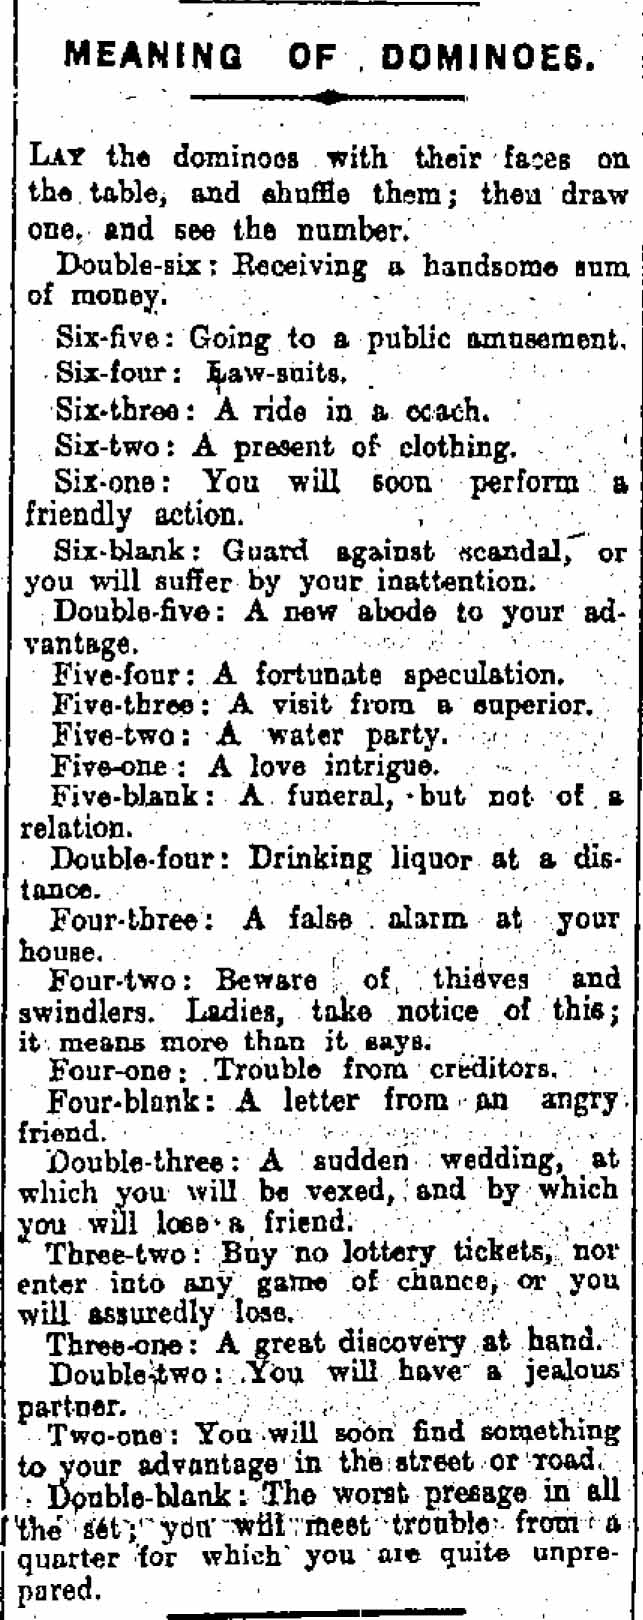 Figure 4. The meaning of dominoes. Image: New Zealand Herald 24/12/1912: 7.